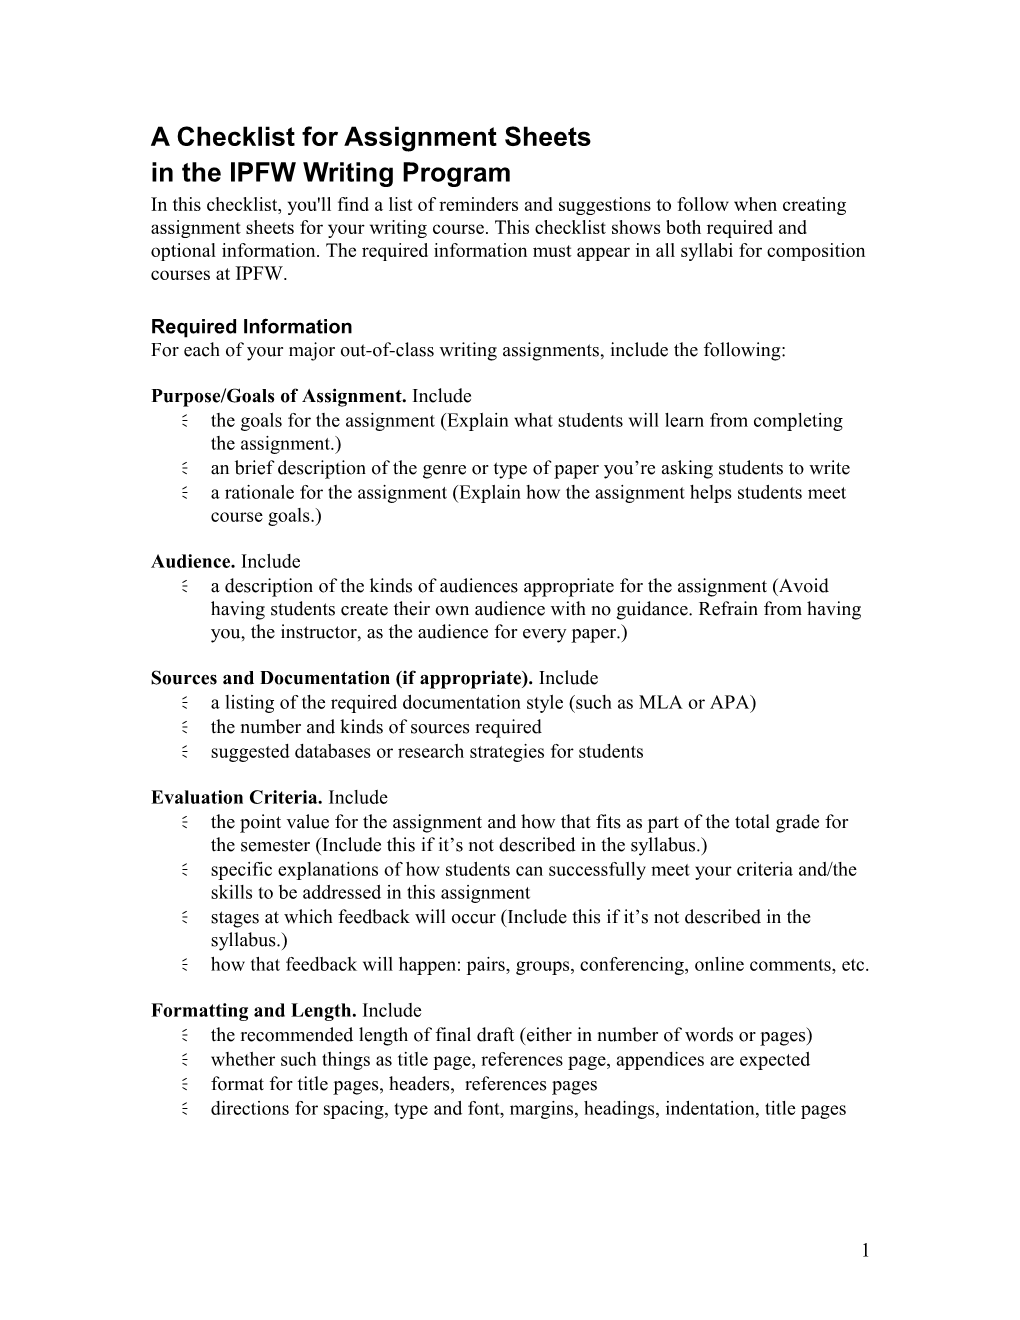 A Checklist for Assignment Sheets in the IPFW Writing Program